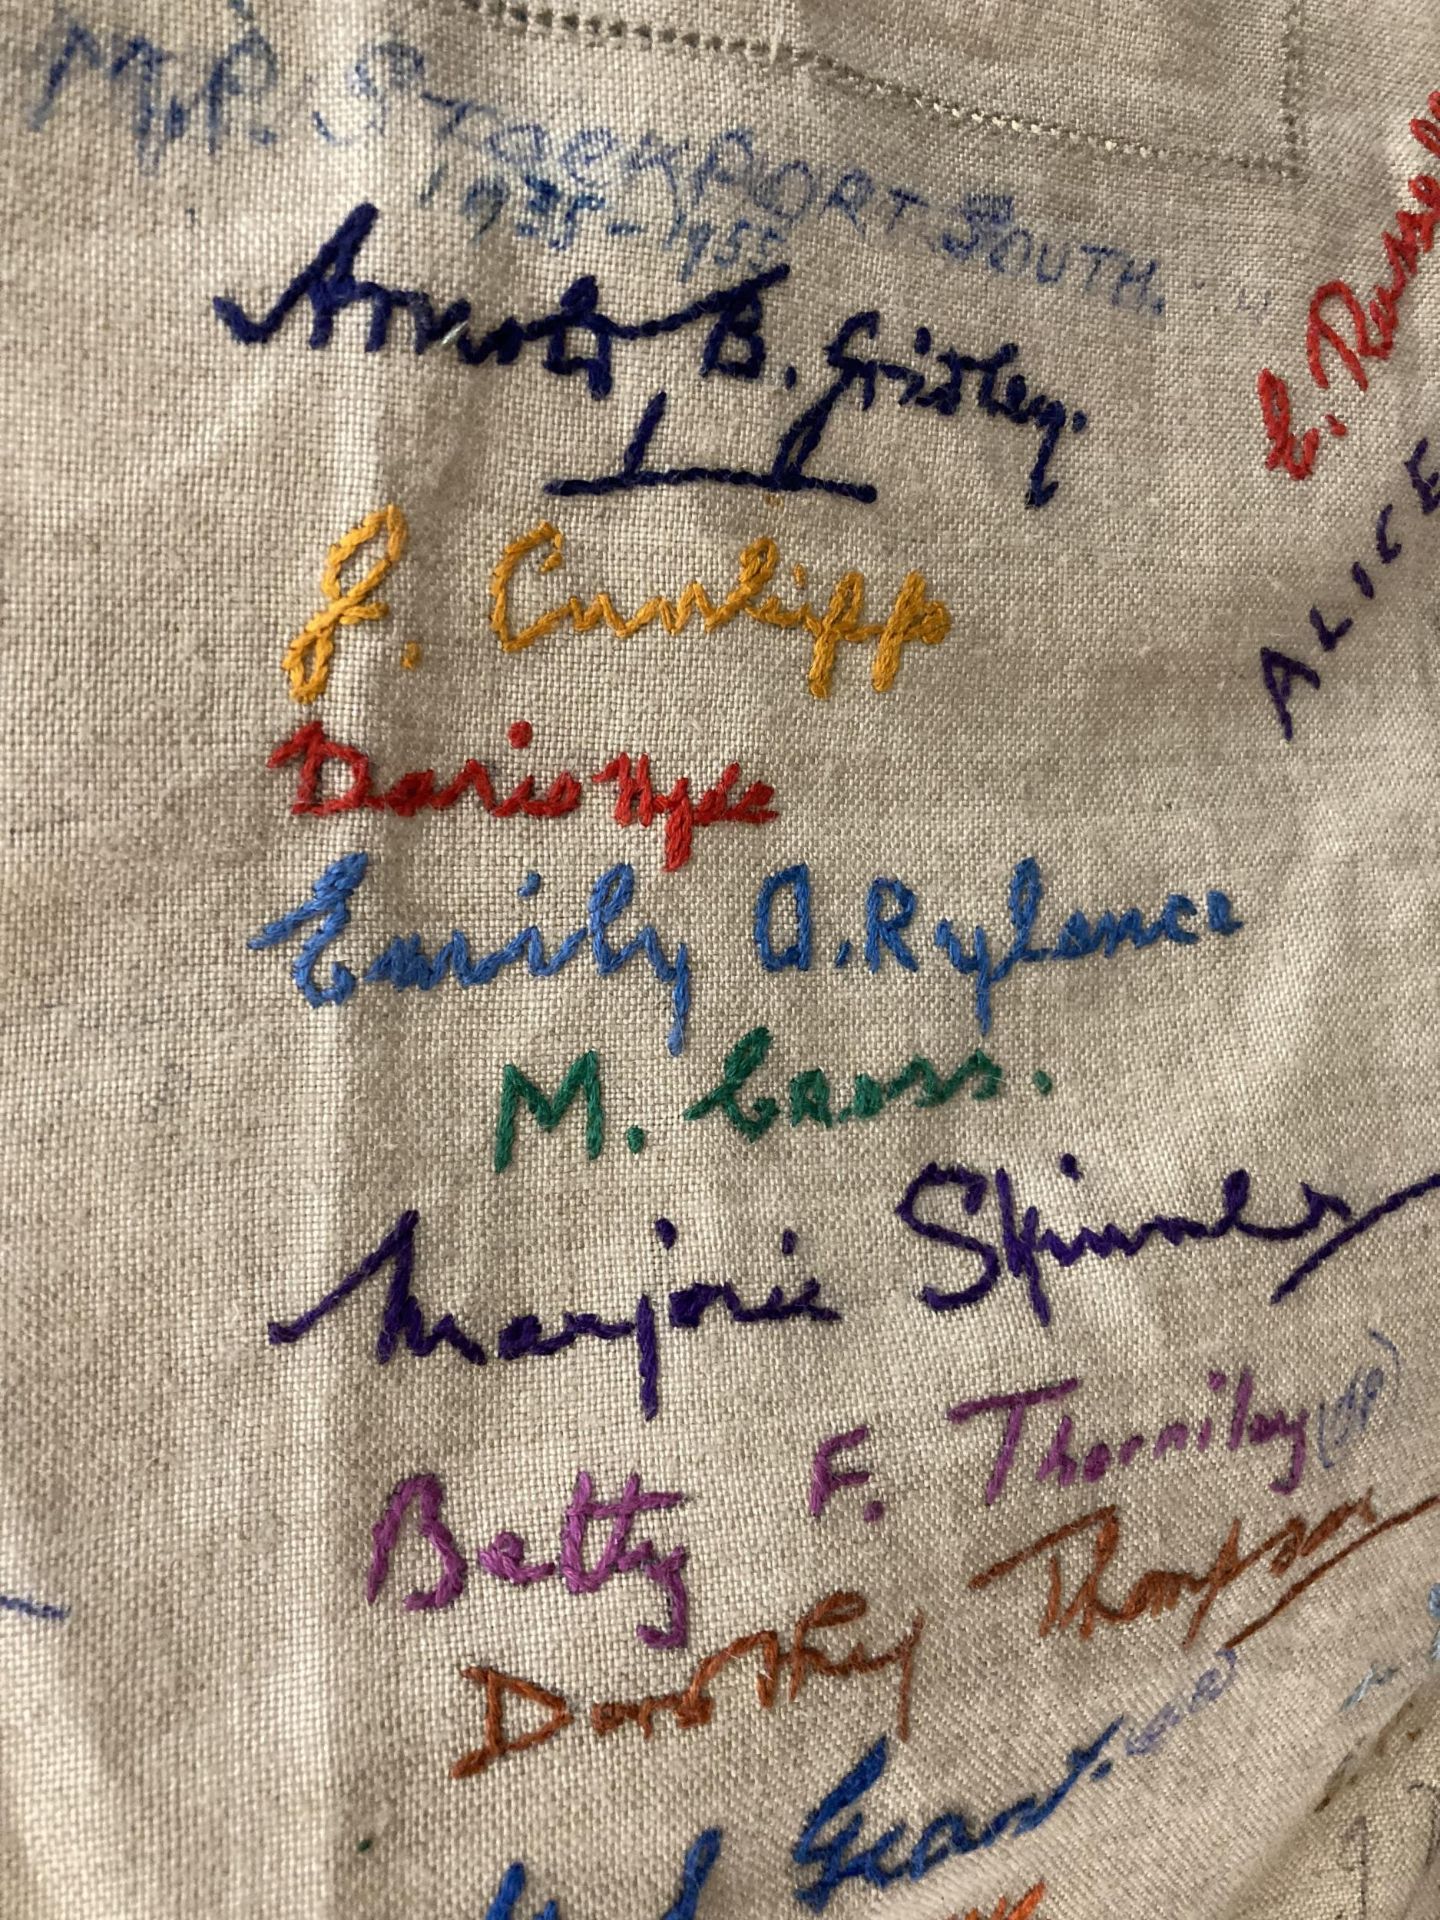 A SIGNED WITH EMBROIDERY STOCKPORT CONSERVATIVE PARTY CLOTH - Image 5 of 5